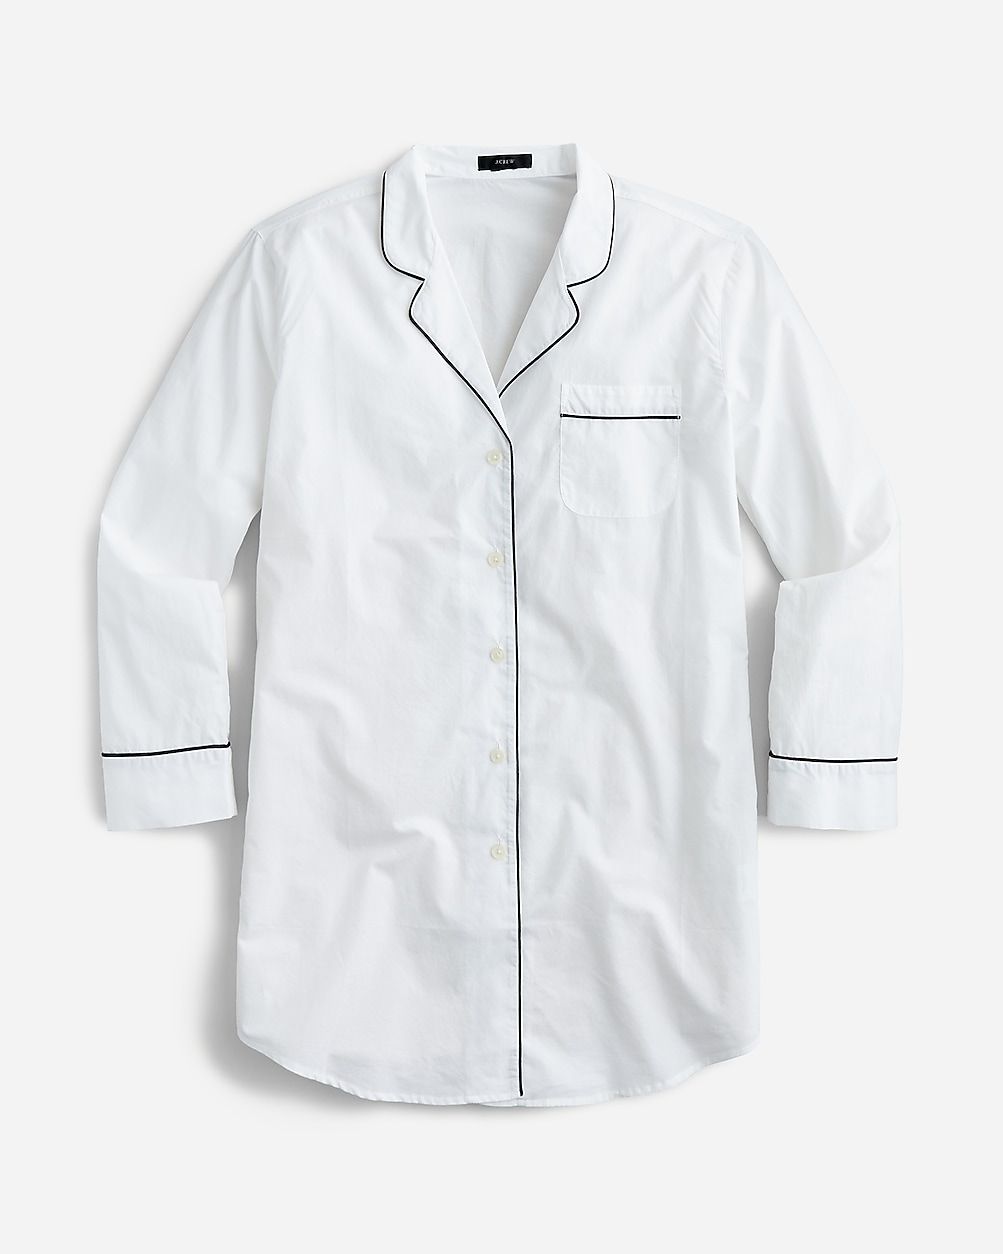 End-on-end cotton nightshirt | J.Crew US